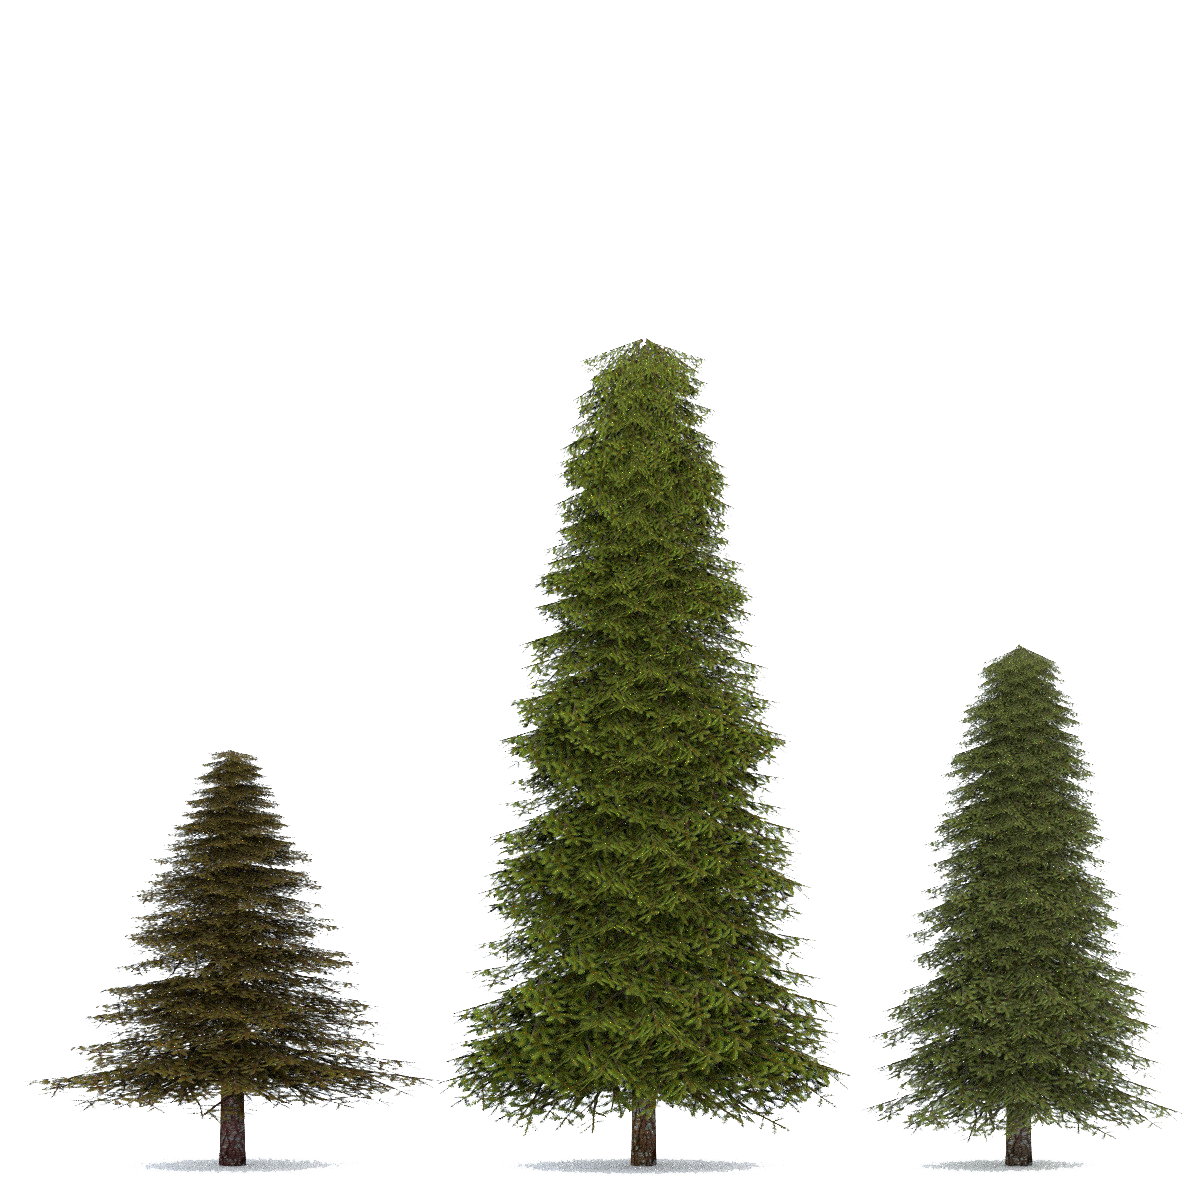 Fir Tree Png Transparent Image - Firtree, Transparent background PNG HD thumbnail